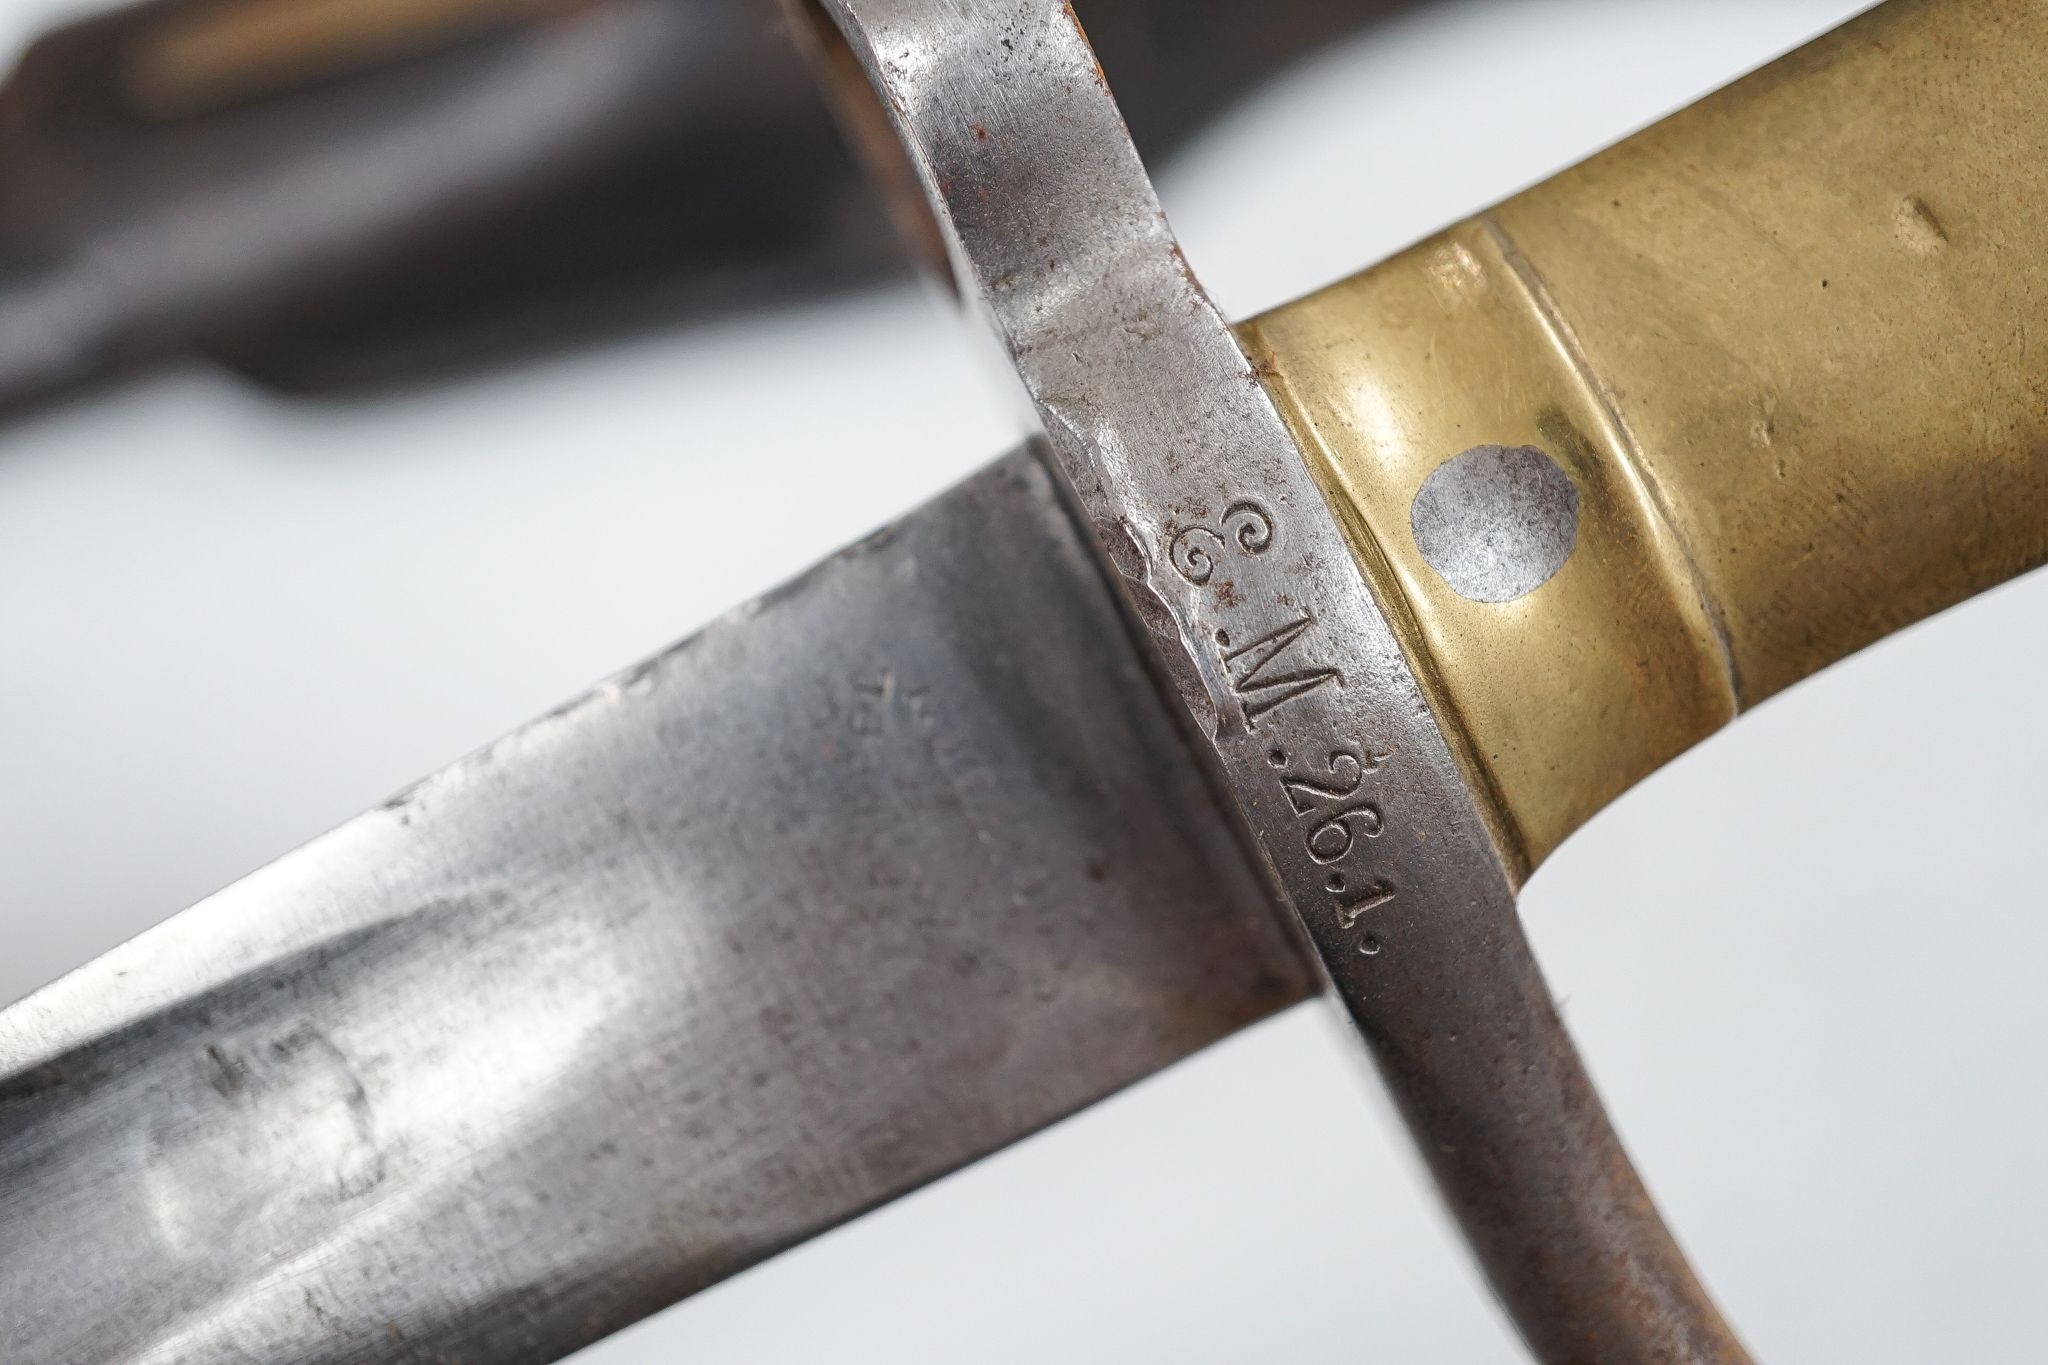 A French bayonet and scabbard with matching serial number (38804) and inscription and date to back of blade (1879) and another Solingen bayonet and scabbard